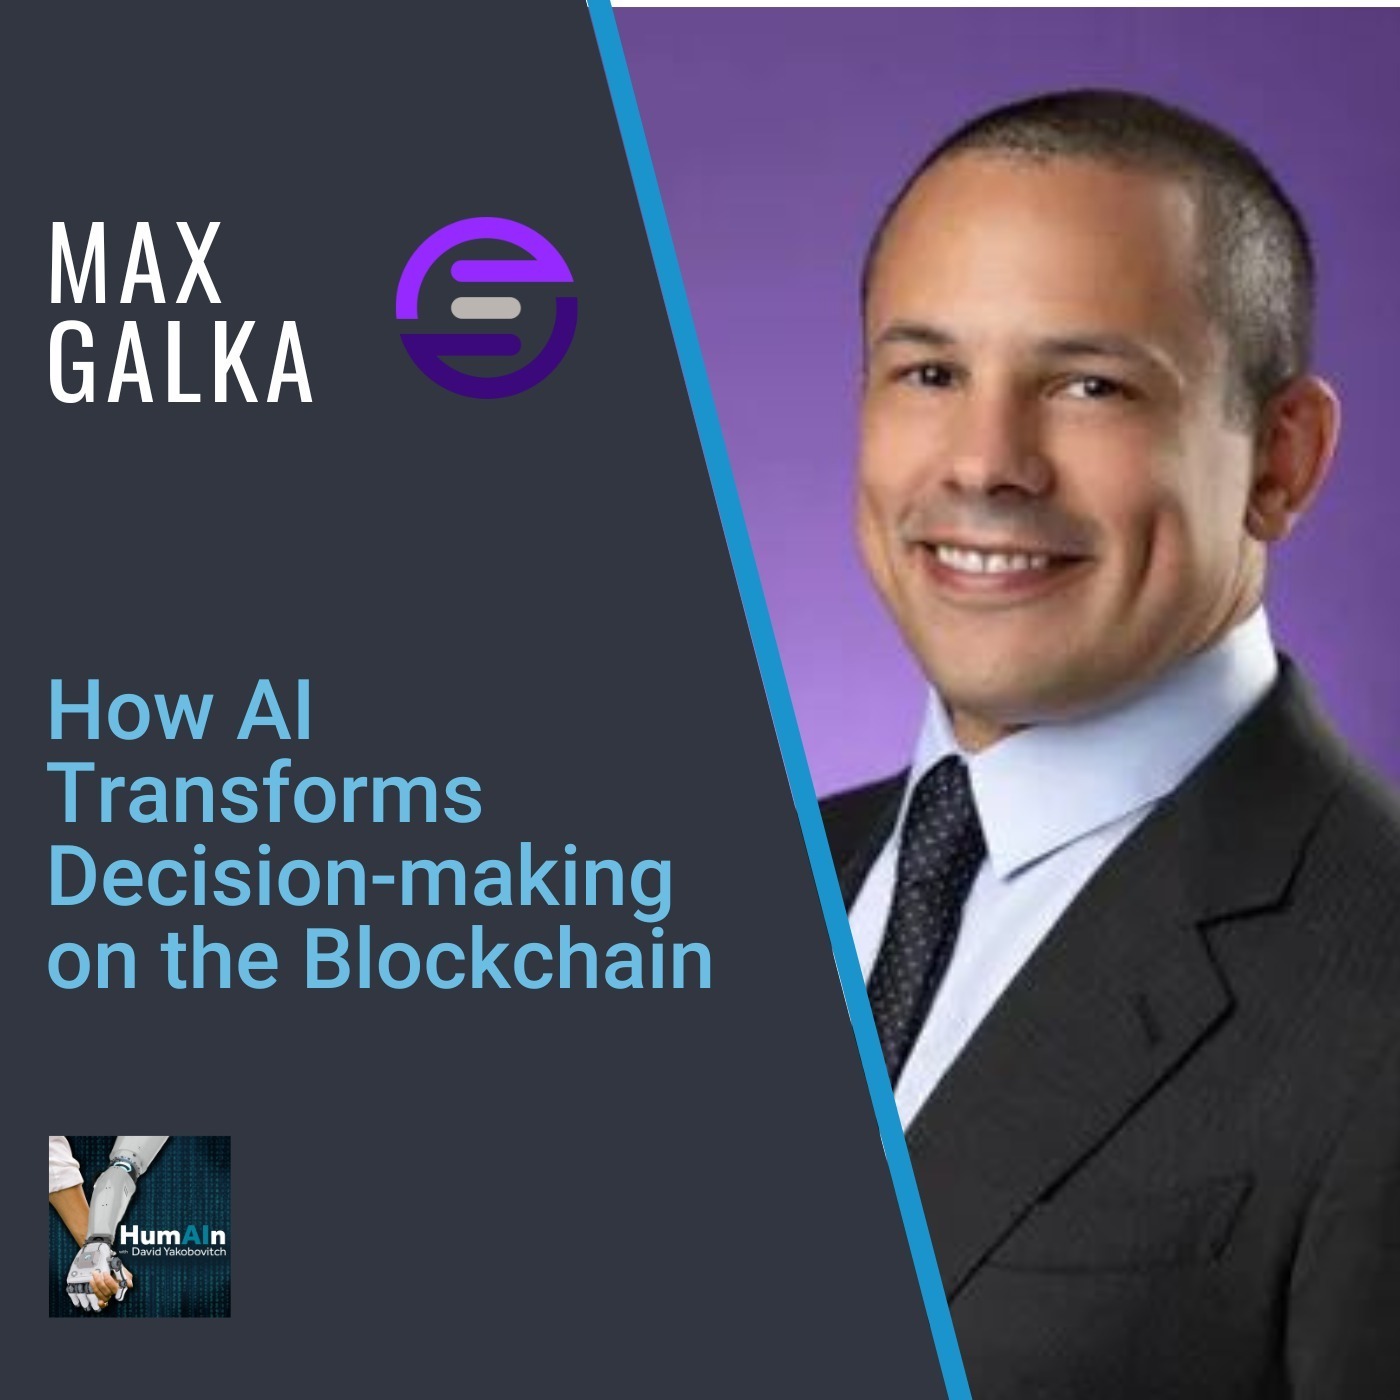 Max Galka: How AI Transforms Decision-making on the Blockchain